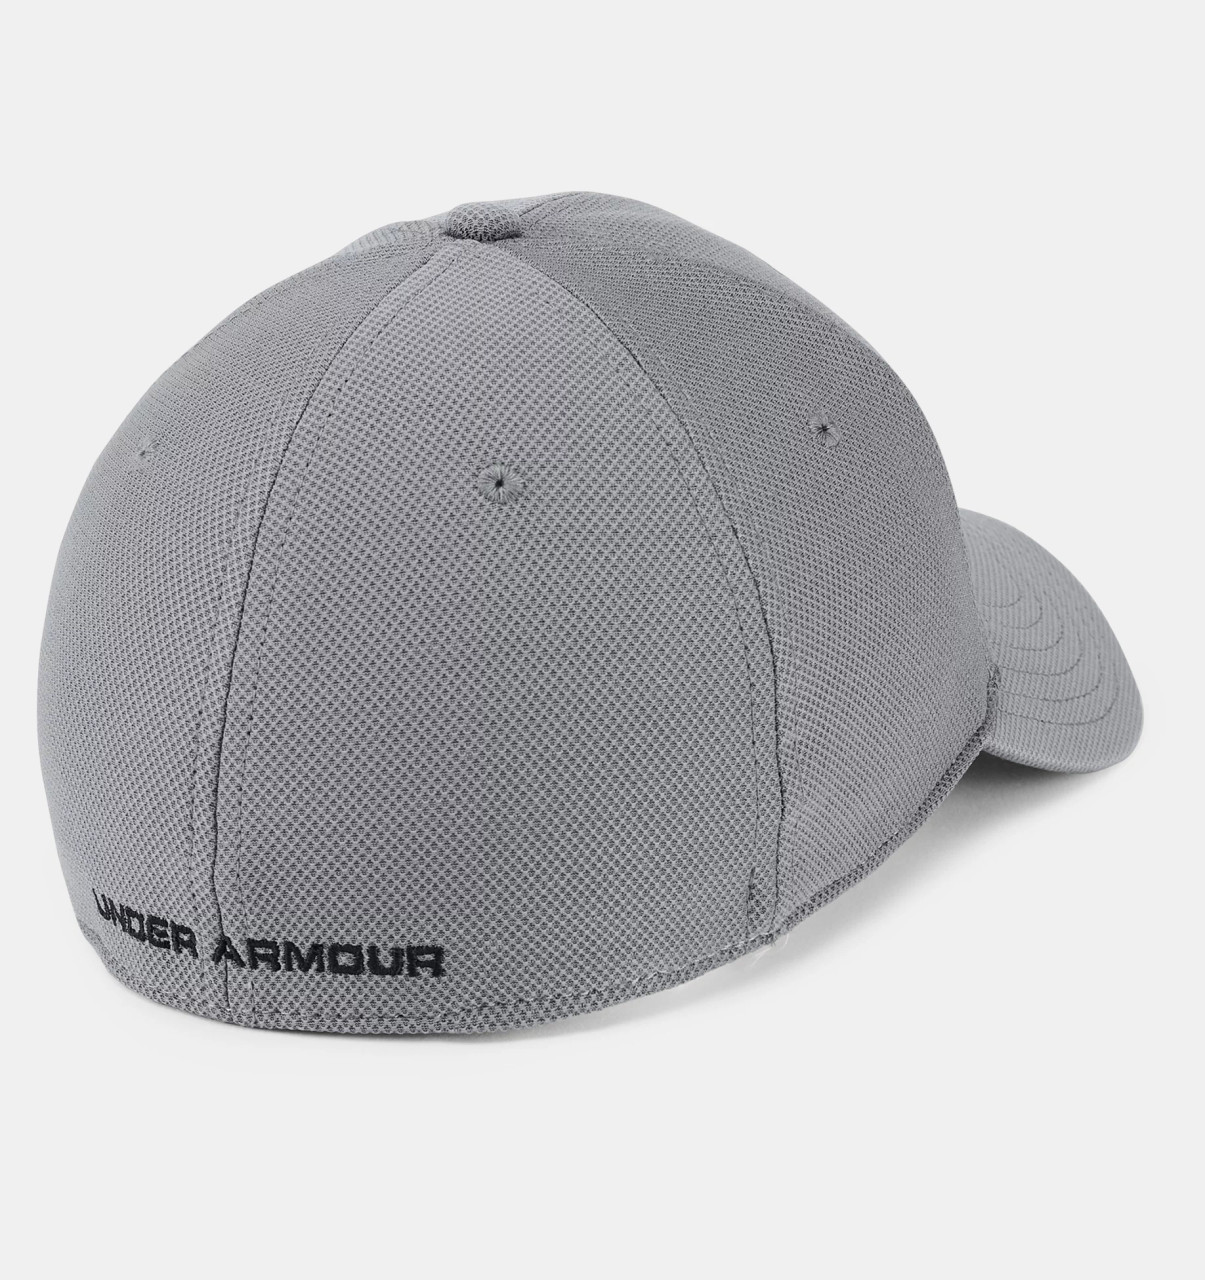 https://cdn11.bigcommerce.com/s-e7wr5xw2bd/images/stencil/1280x1280/products/2535/8119/under-armour-1305036-040-Classic-Fit-cap-patch-Hats-kowear-02__41160.1642753125.jpg?c=1?imbypass=on